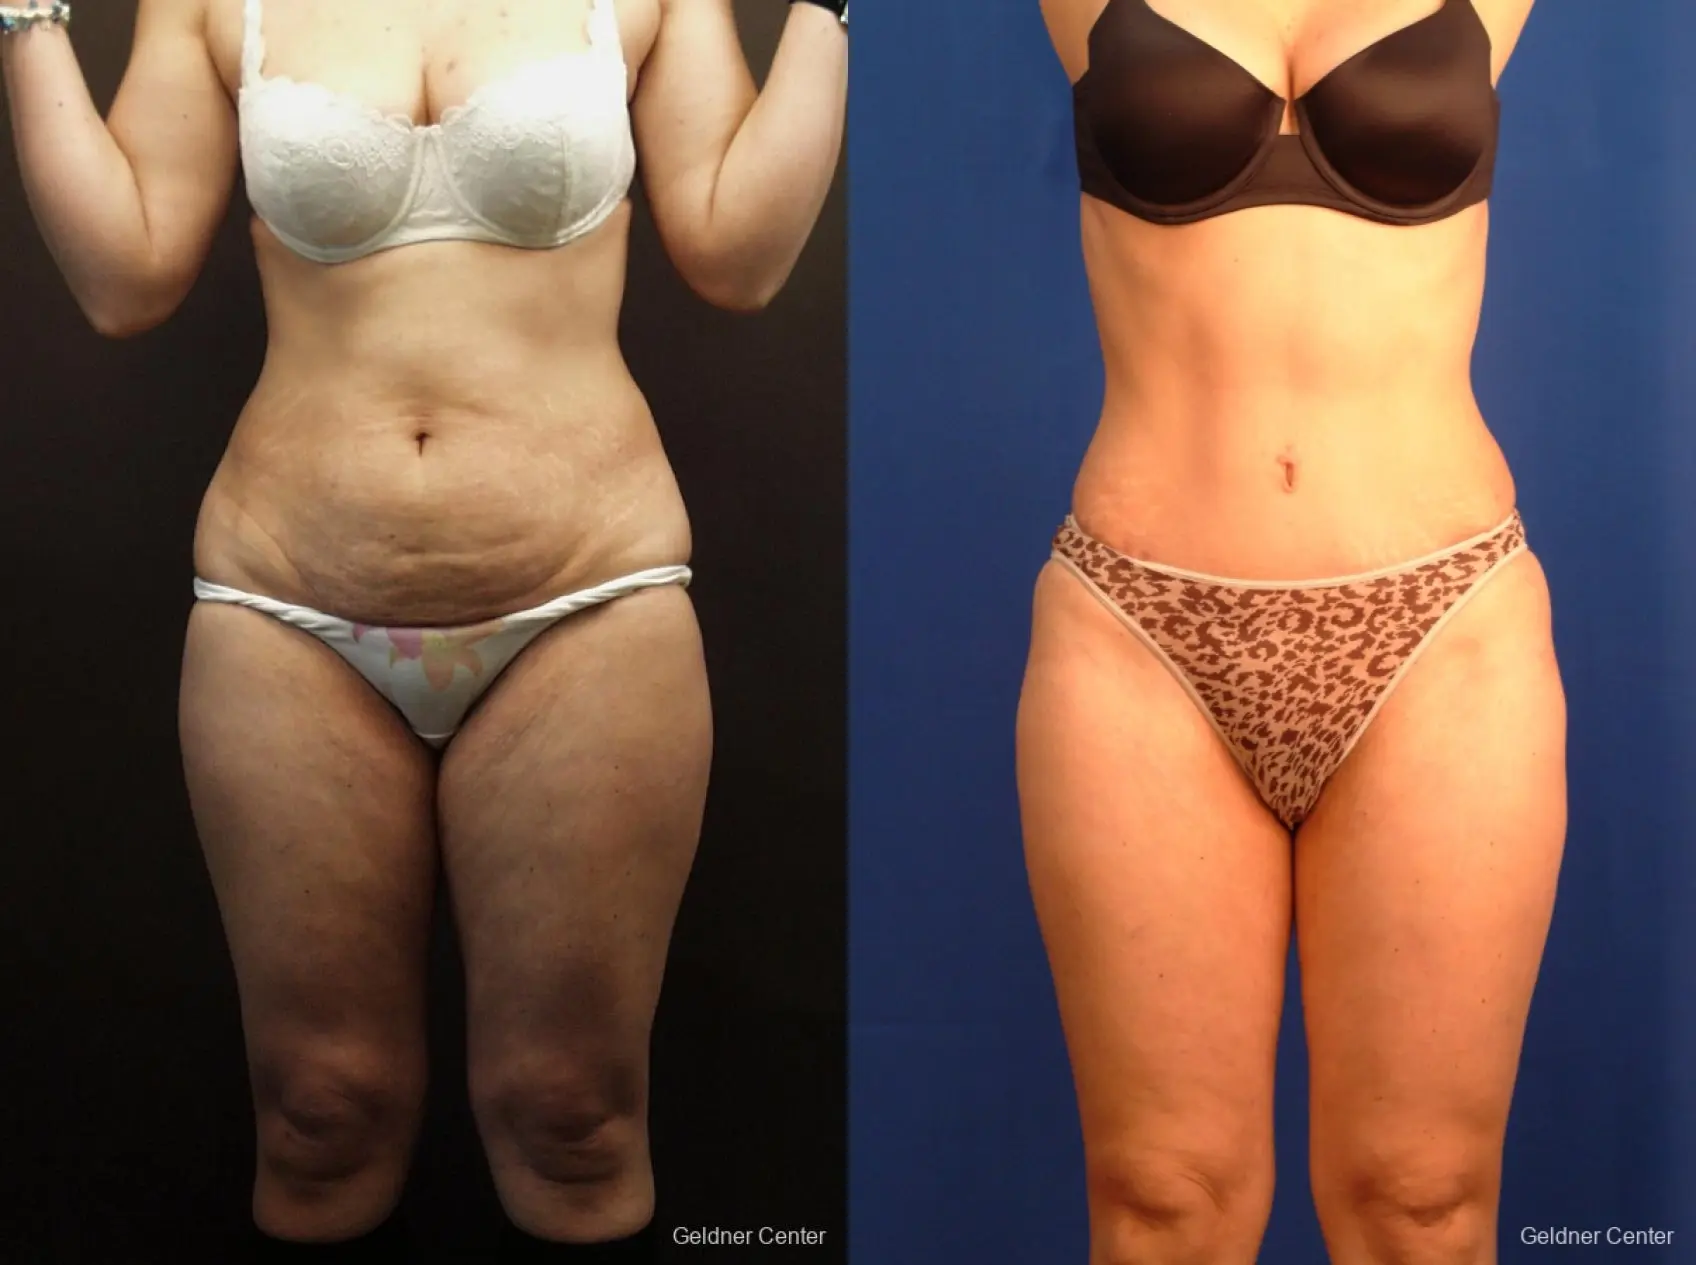 Tummy Tuck: Patient 8 - Before and After  